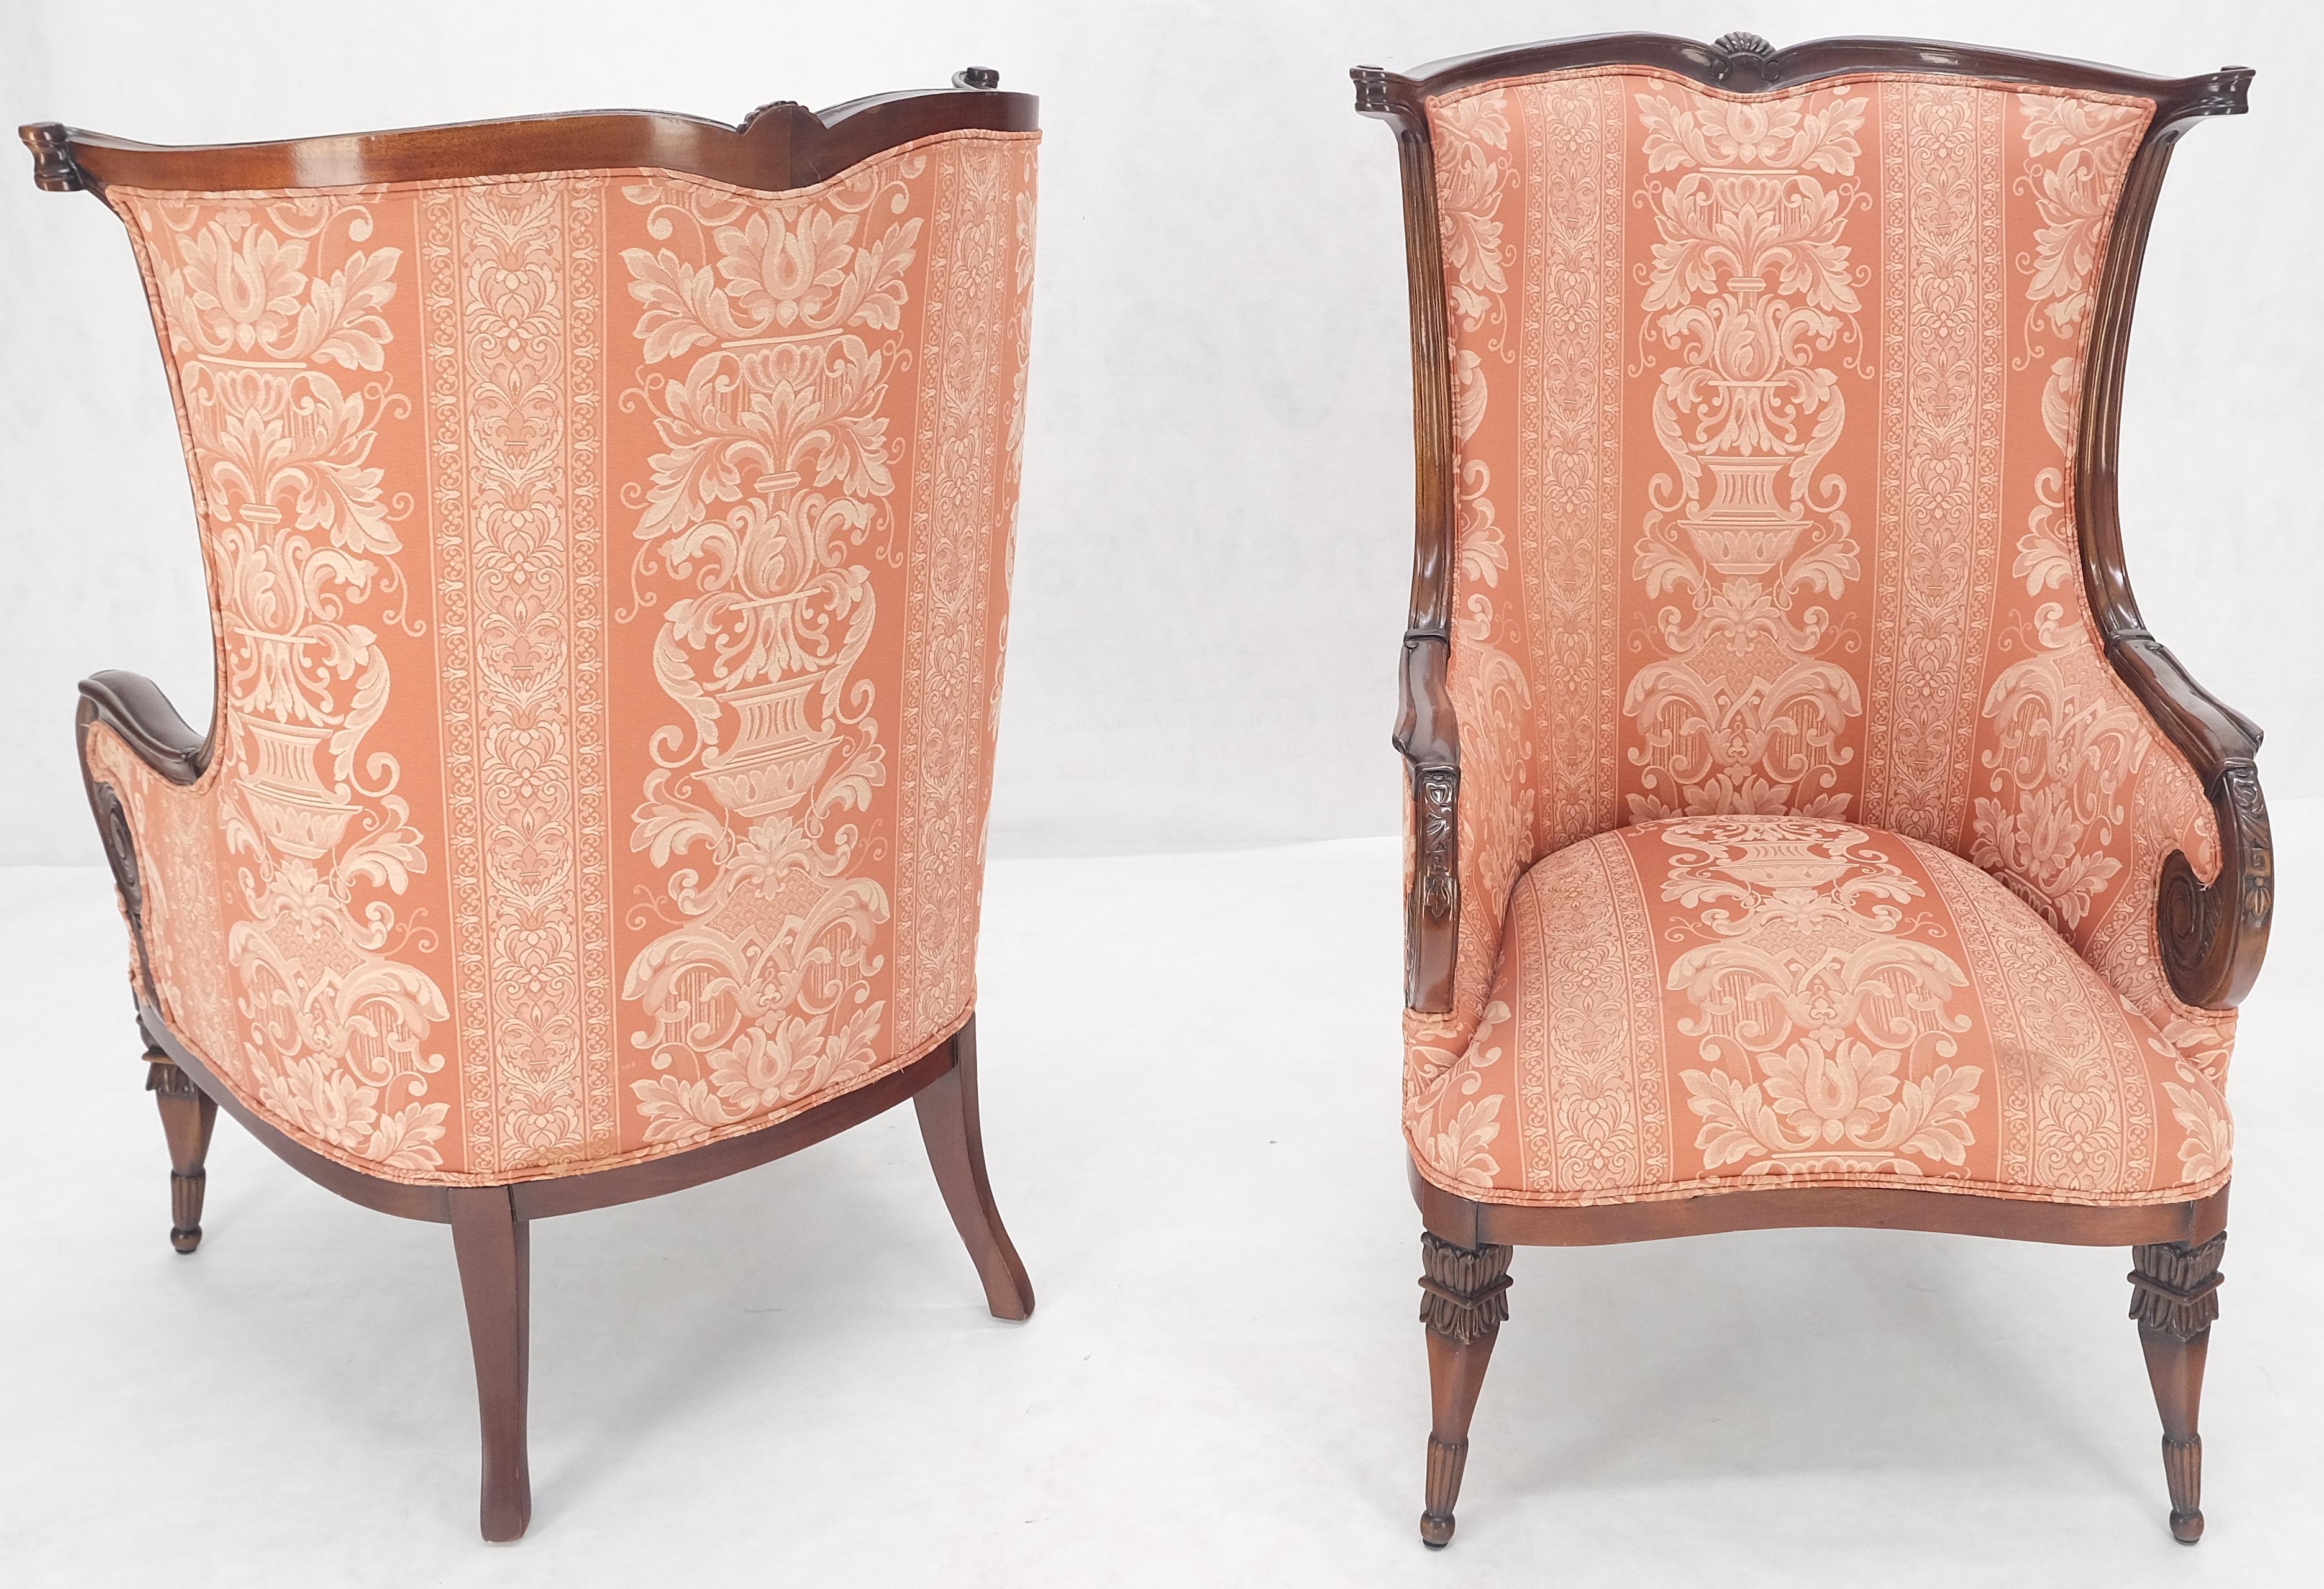 20th Century Pair of Fine Carved Mahogany Cream Silk Like Upholstery Regency Fire Side Chairs For Sale